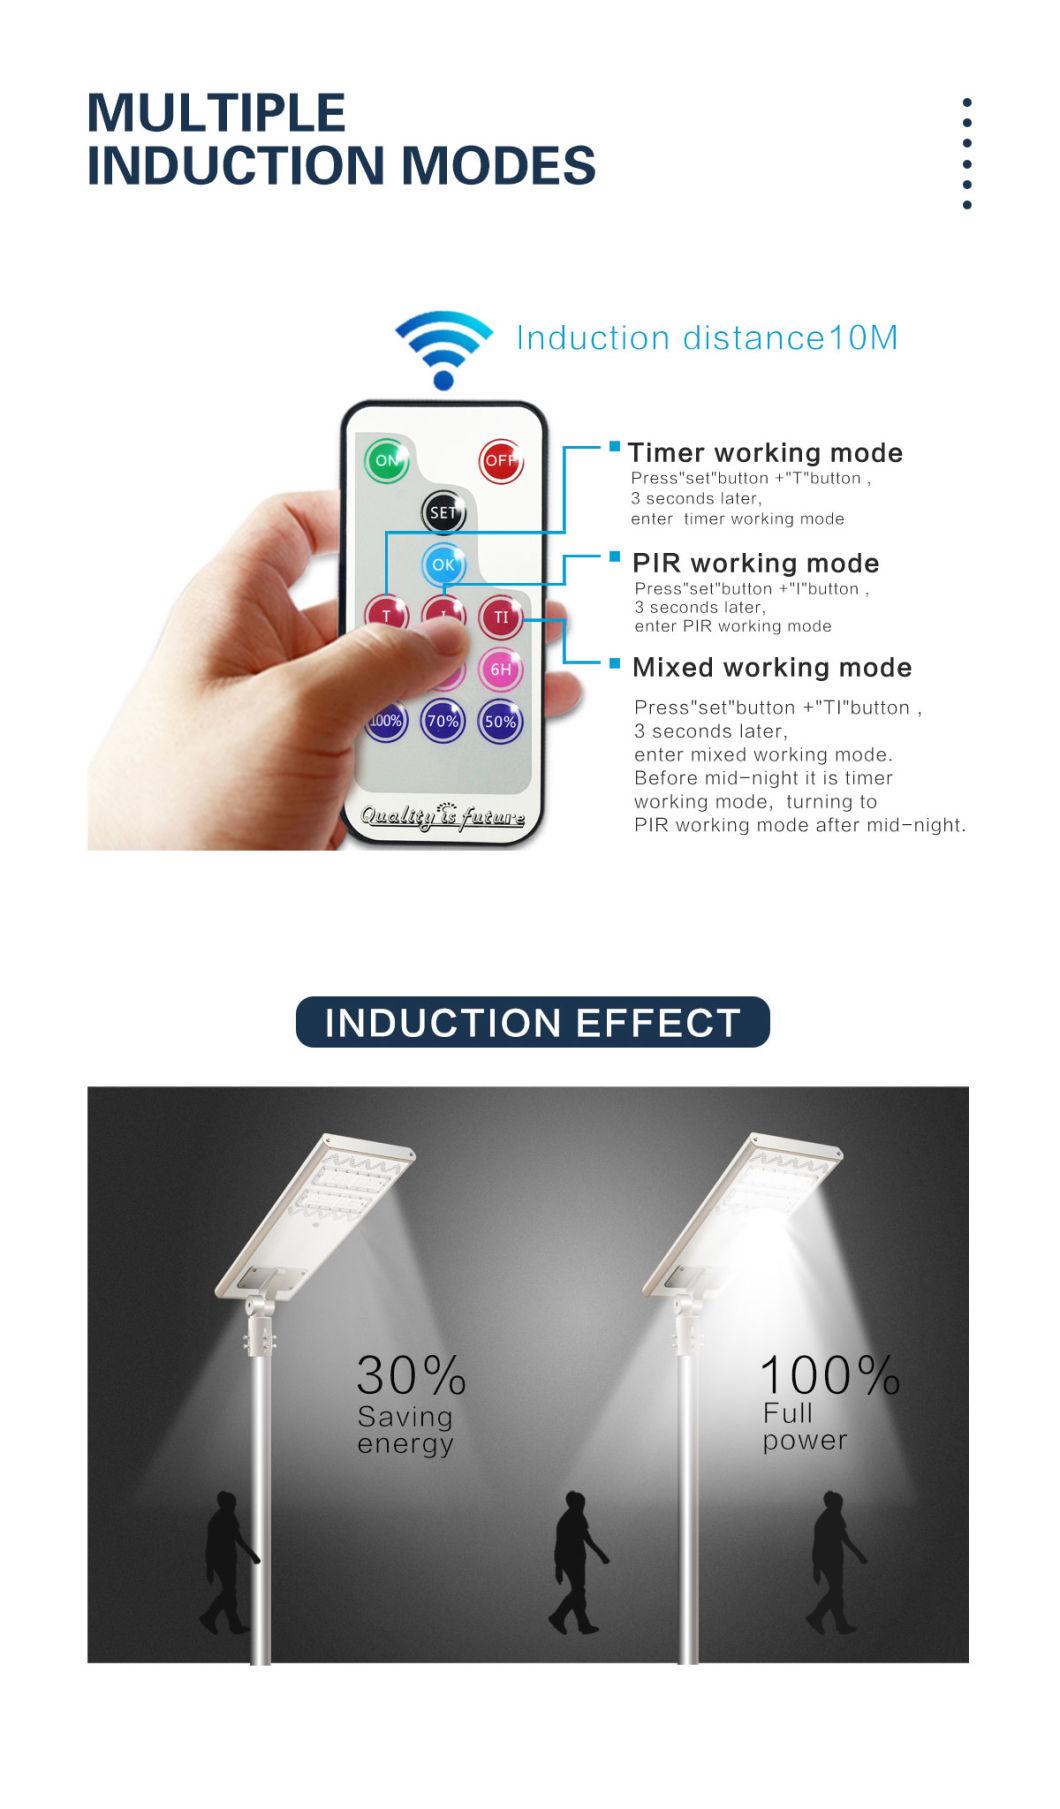 Motion Sensor All-in-One LED Solar Street Light 60W for Pathway Coast Areas Parking Lot Project